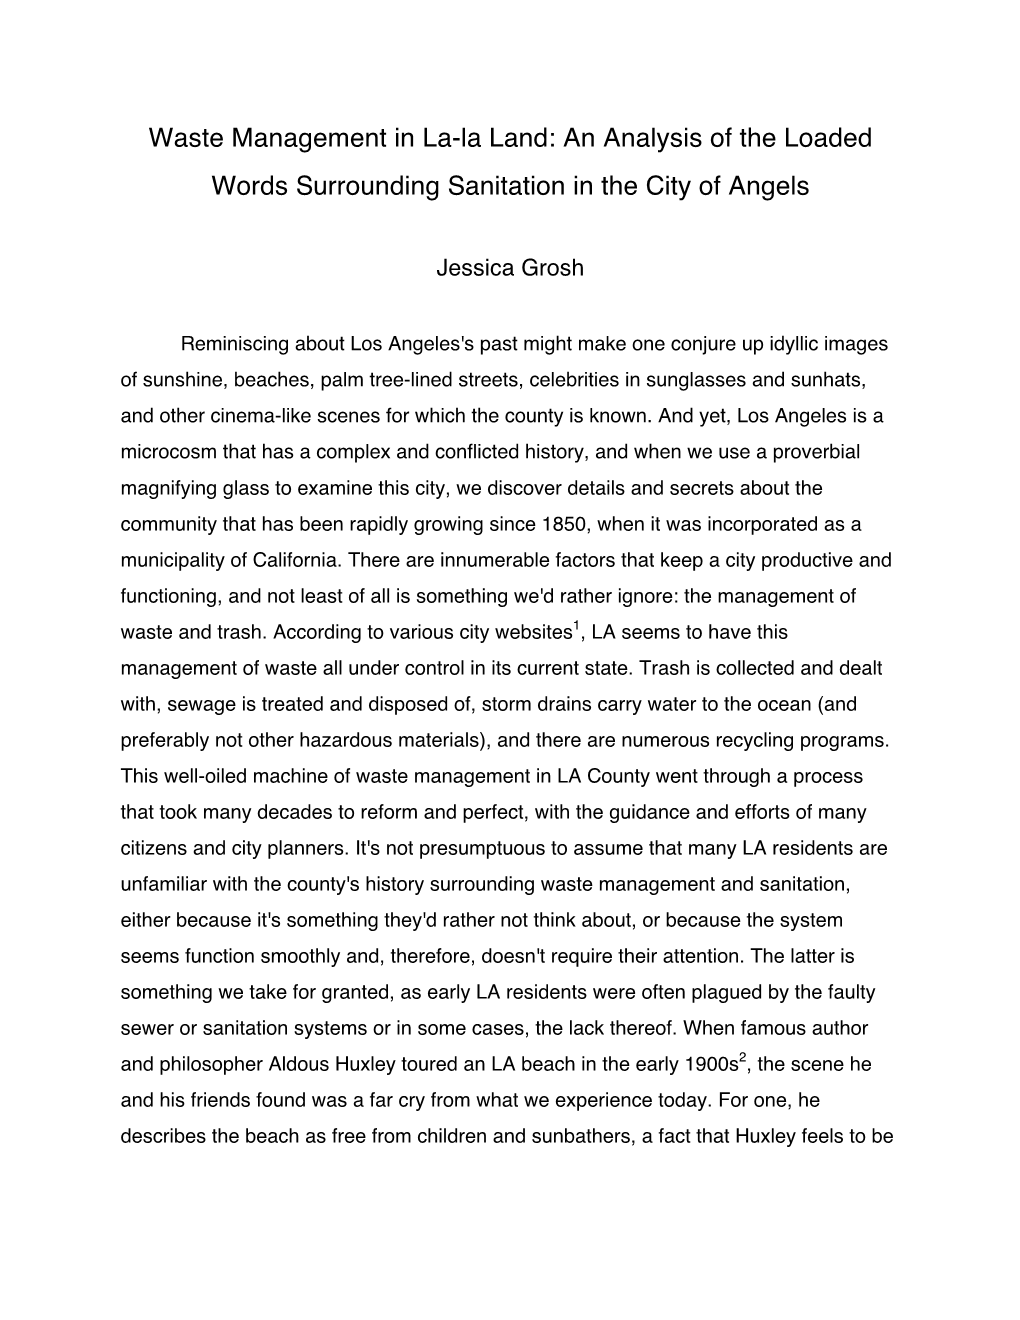 Waste Management in La-La Land: an Analysis of the Loaded Words Surrounding Sanitation in the City of Angels